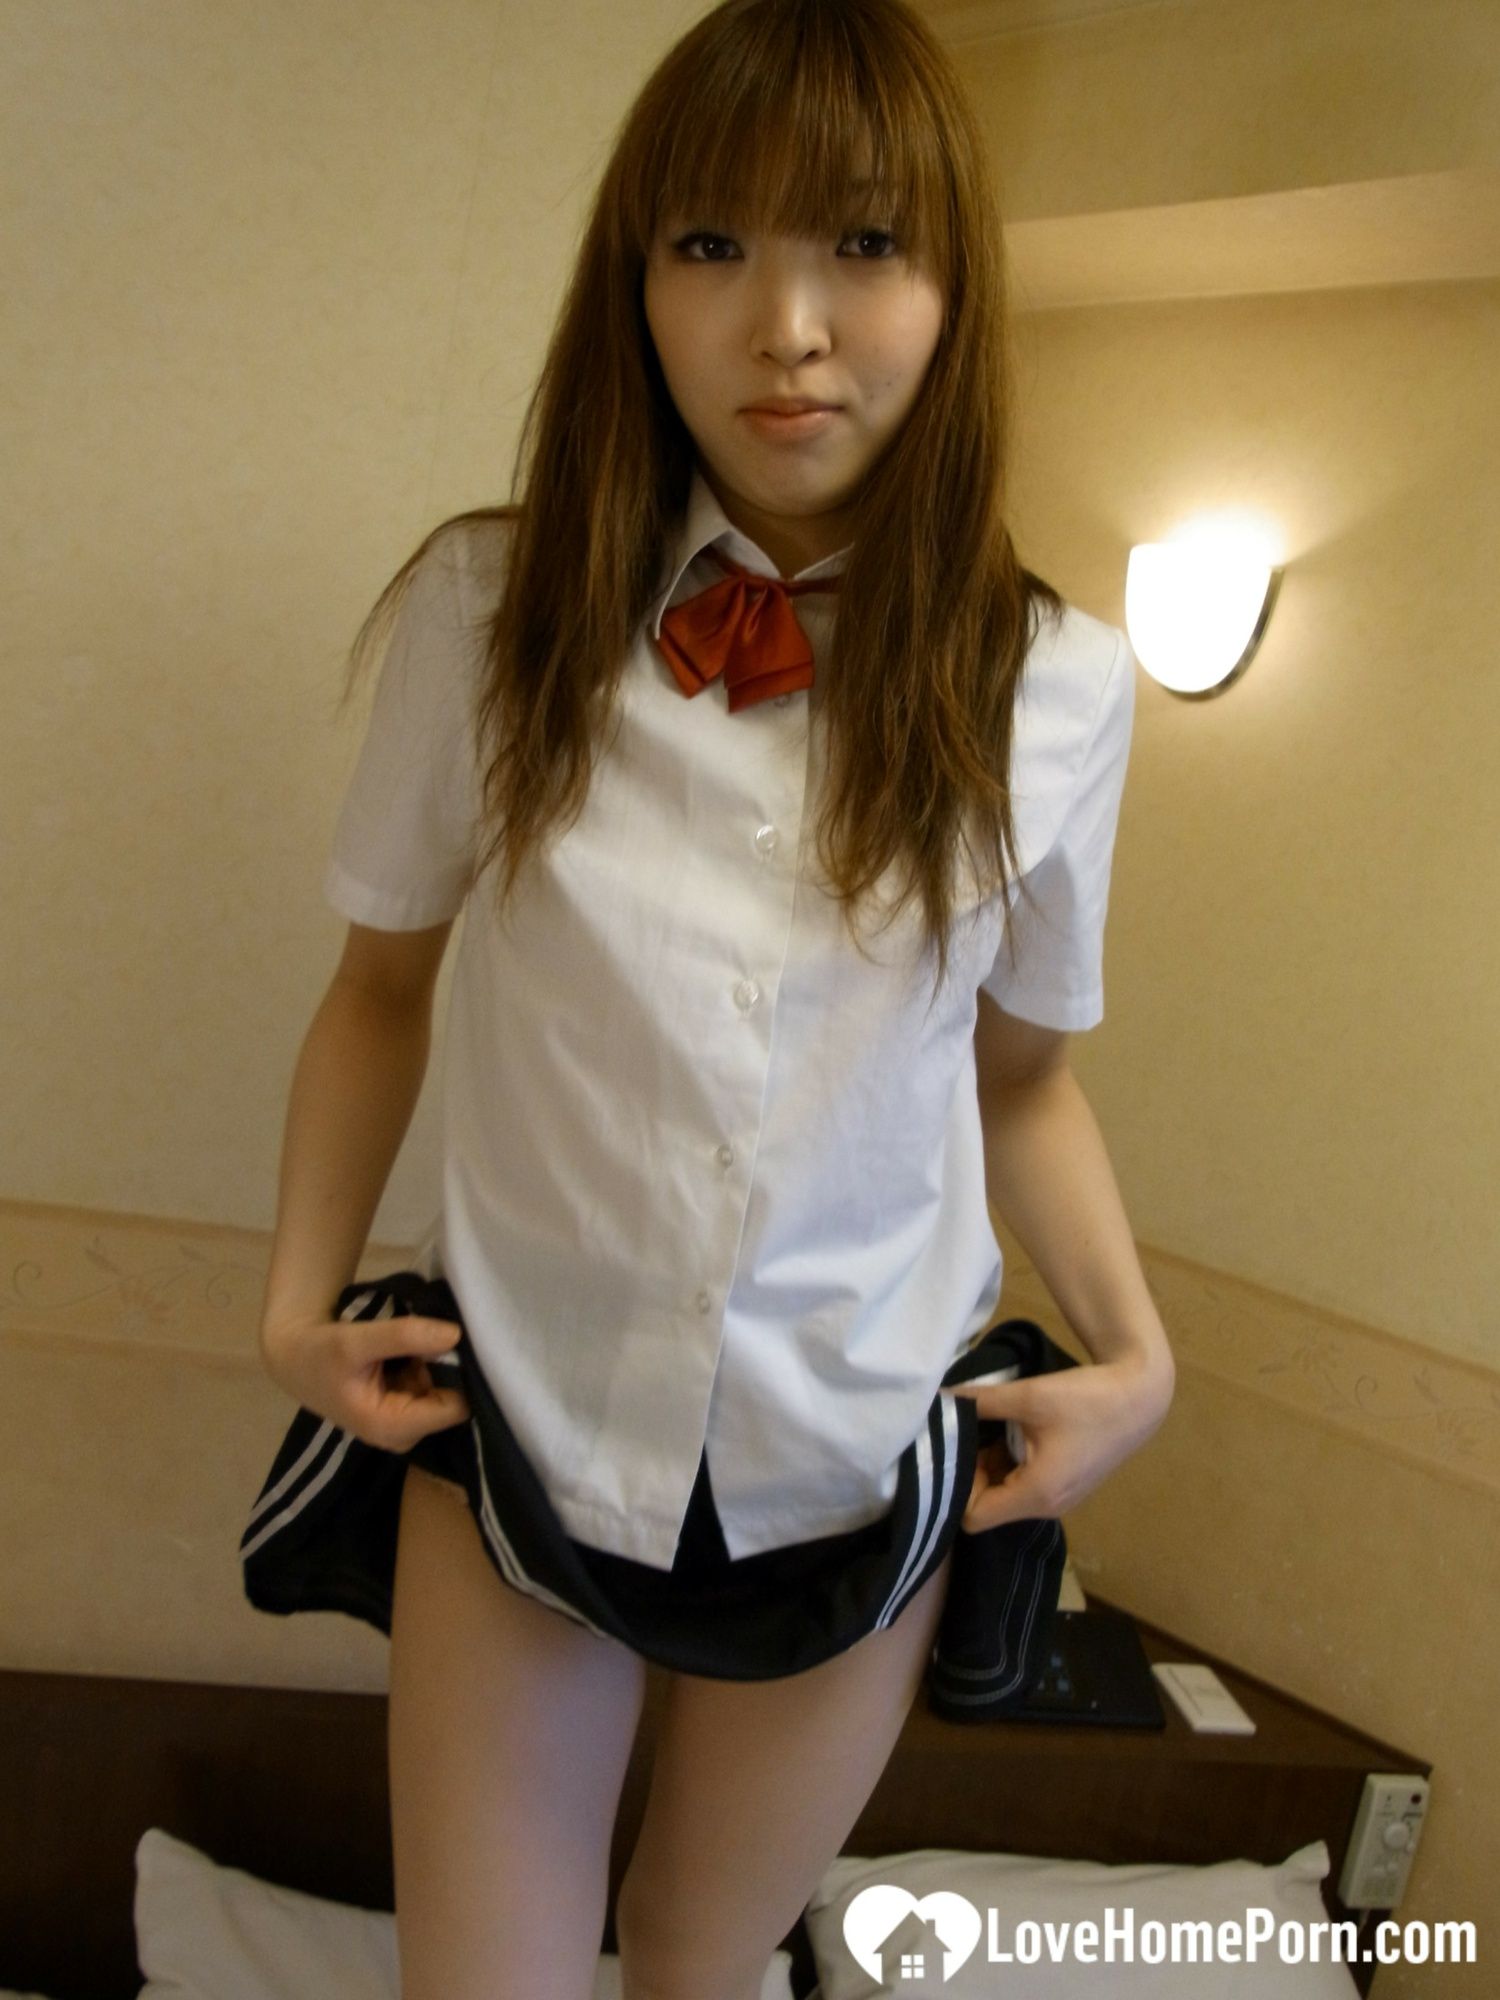 Stunning schoolgirl craves for a fucking session #19